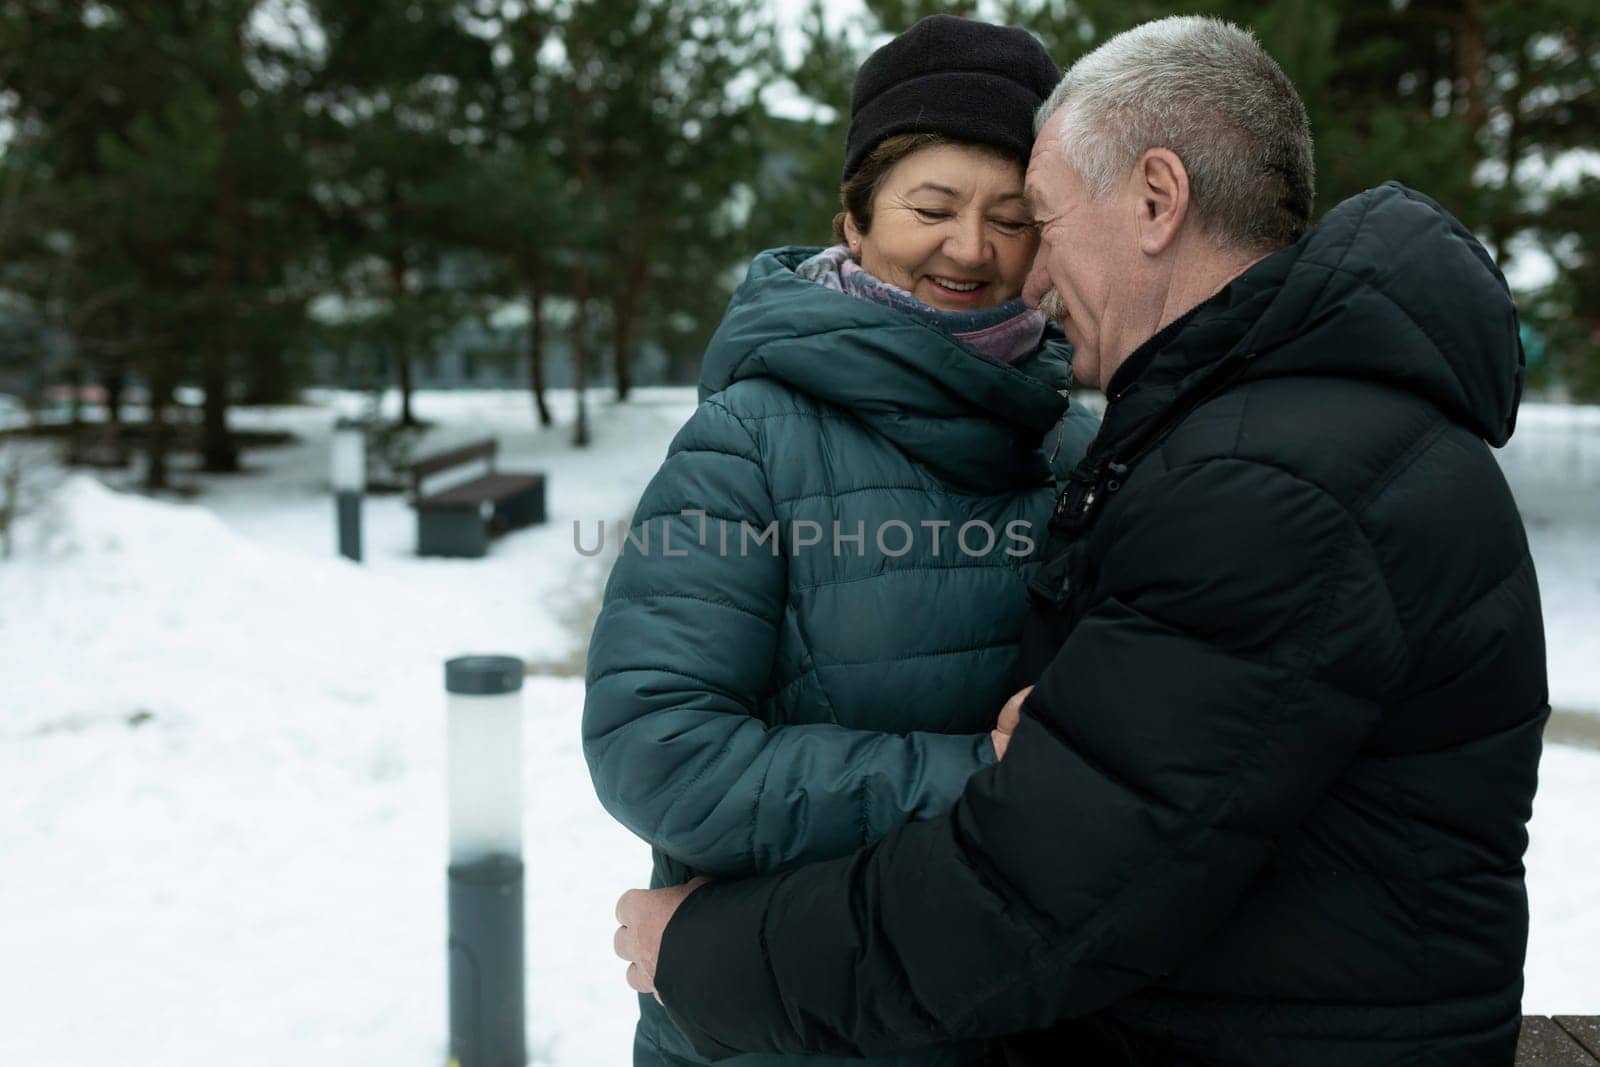 Cute mature couple experiencing love for each other while walking in the park in winter.